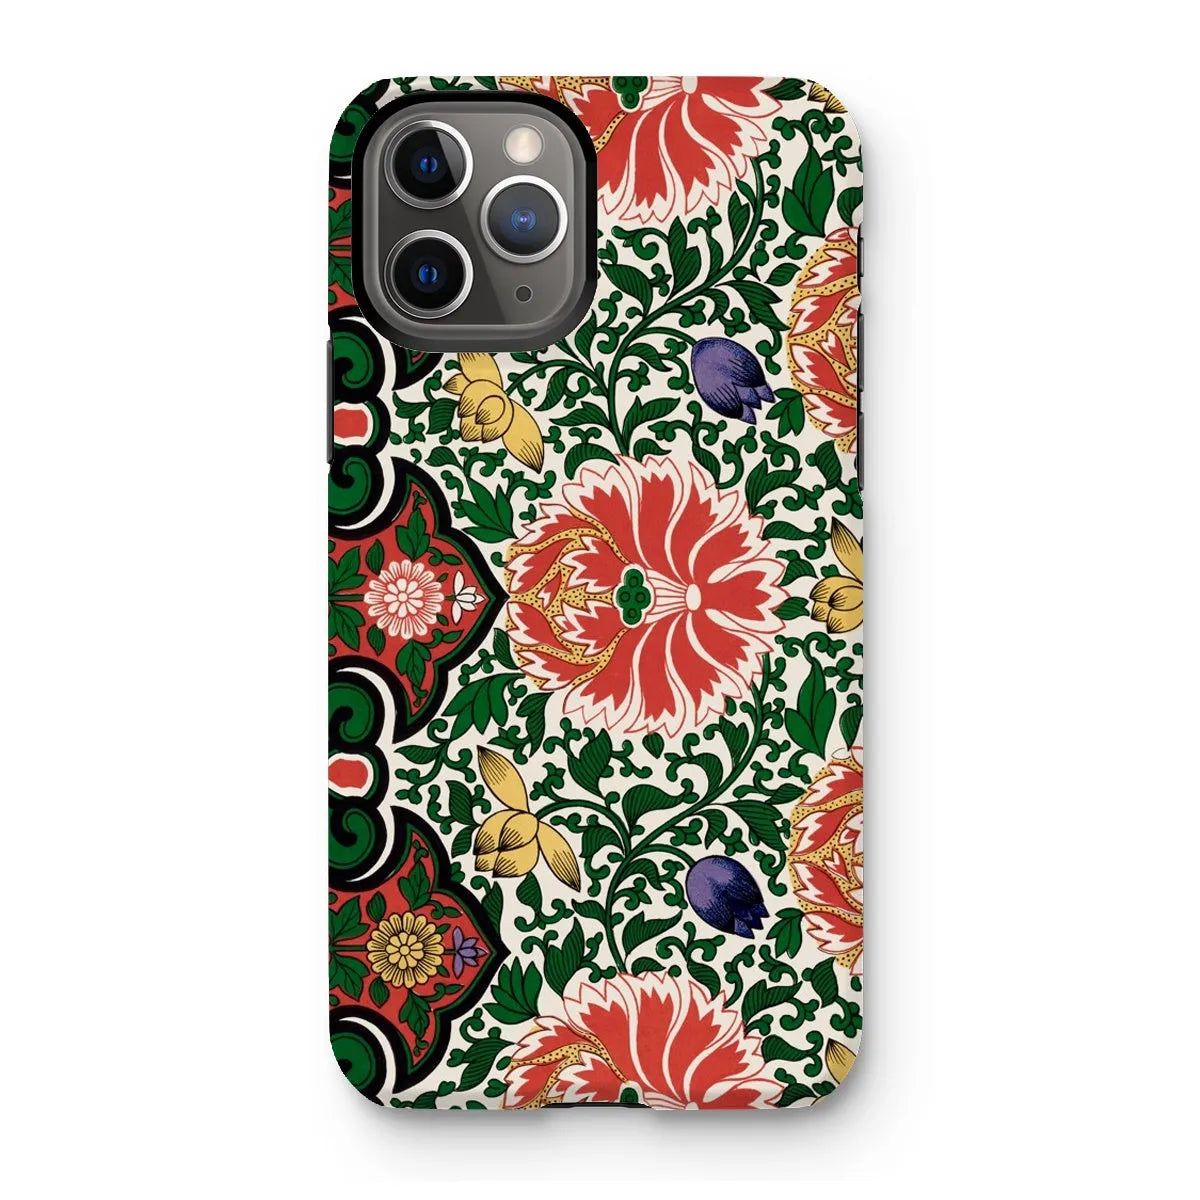 Chinese Floral Pattern Aesthetic Art Phone Case - Owen Jones - Iphone 11 Pro / Matte - Mobile Phone Cases - Aesthetic